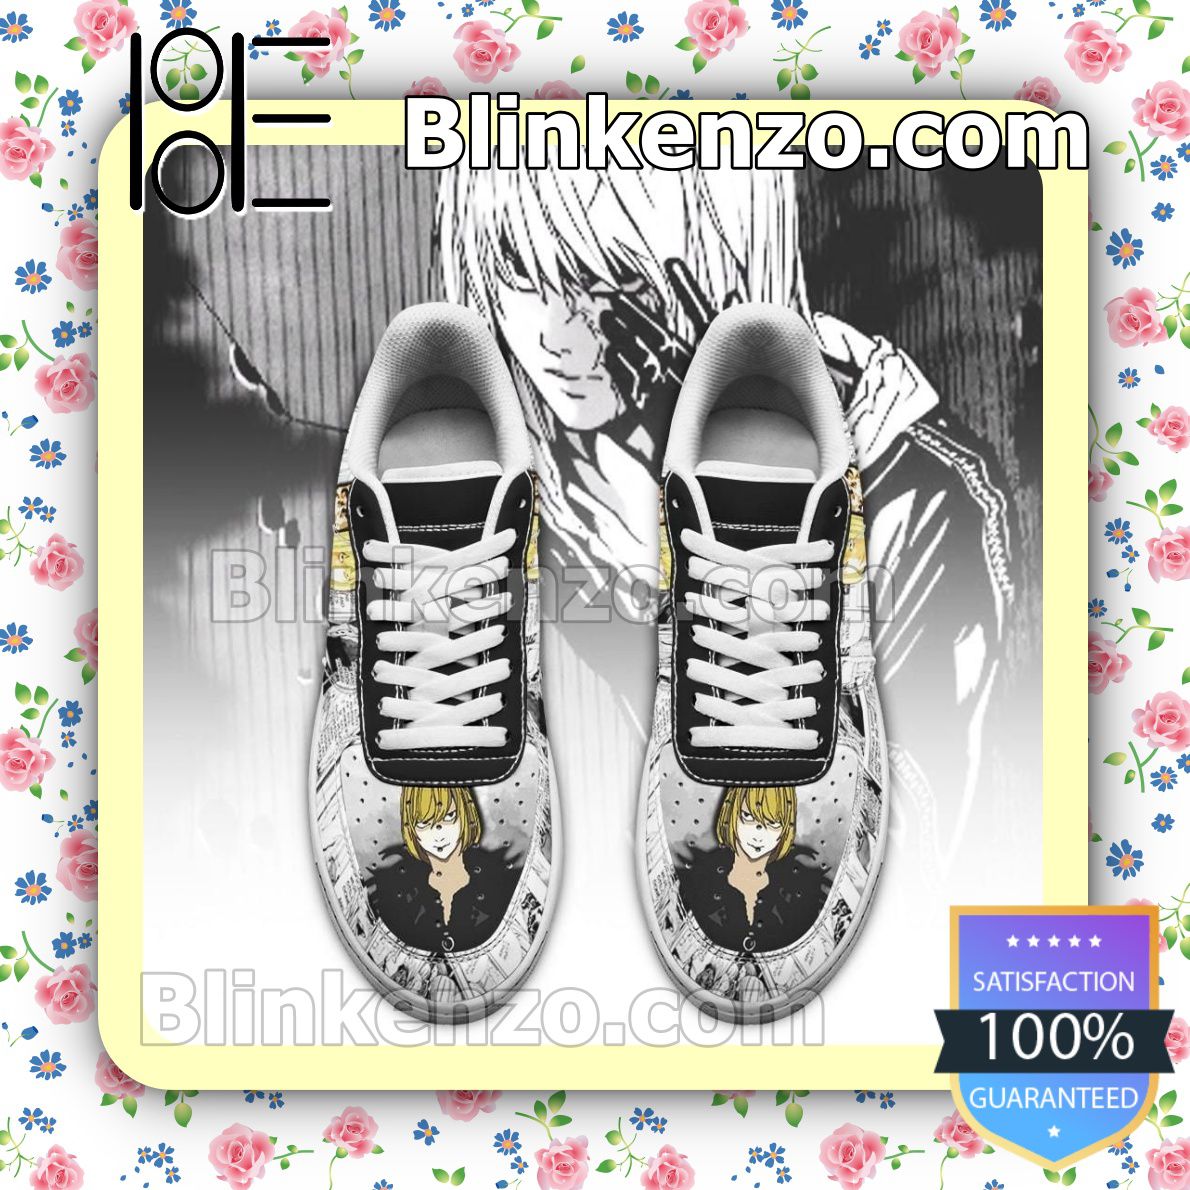 Print On Demand Mello Death Note Anime Nike Air Force Sneakers